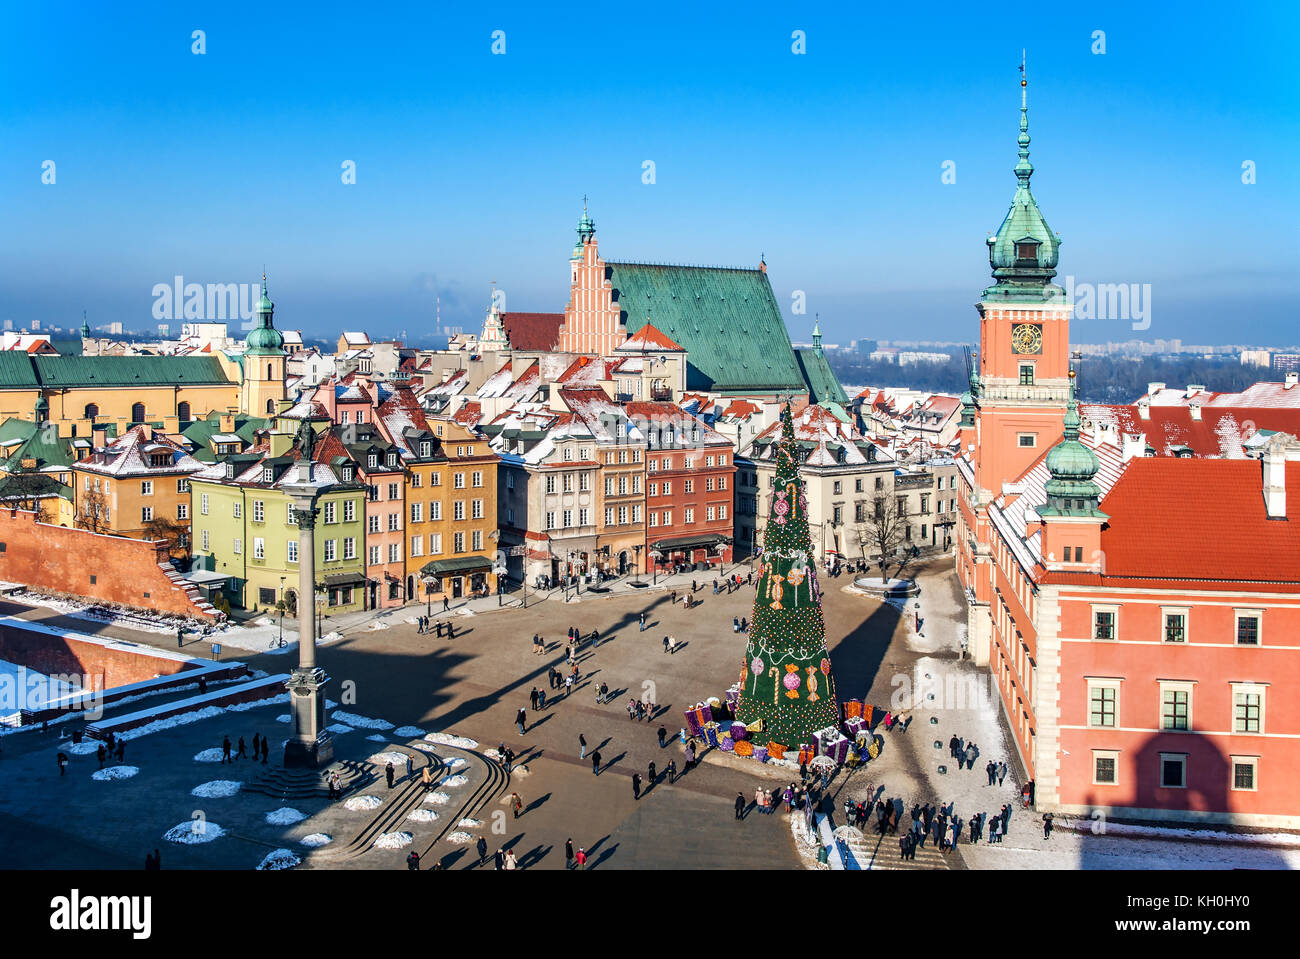 Warsaw old town in winter with Plac Zamkowy (Castle Square), Christmas tree with gifts, Cathedral, Royal Castle, Sigismund's Column and walking people Stock Photo